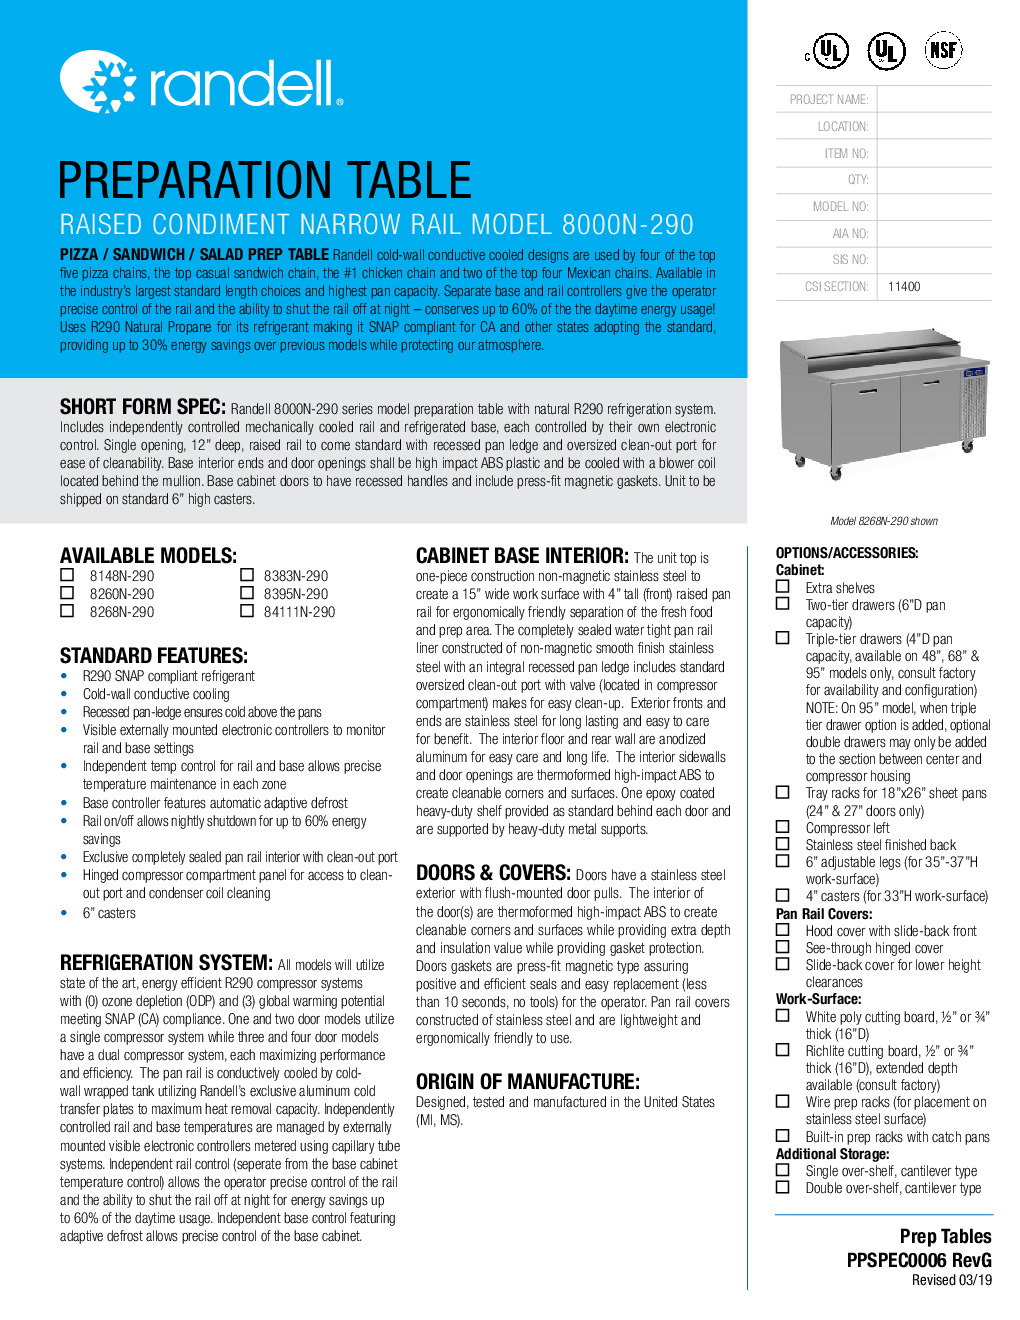 Randell 8395N-290 Pizza Prep Table Refrigerated Counter